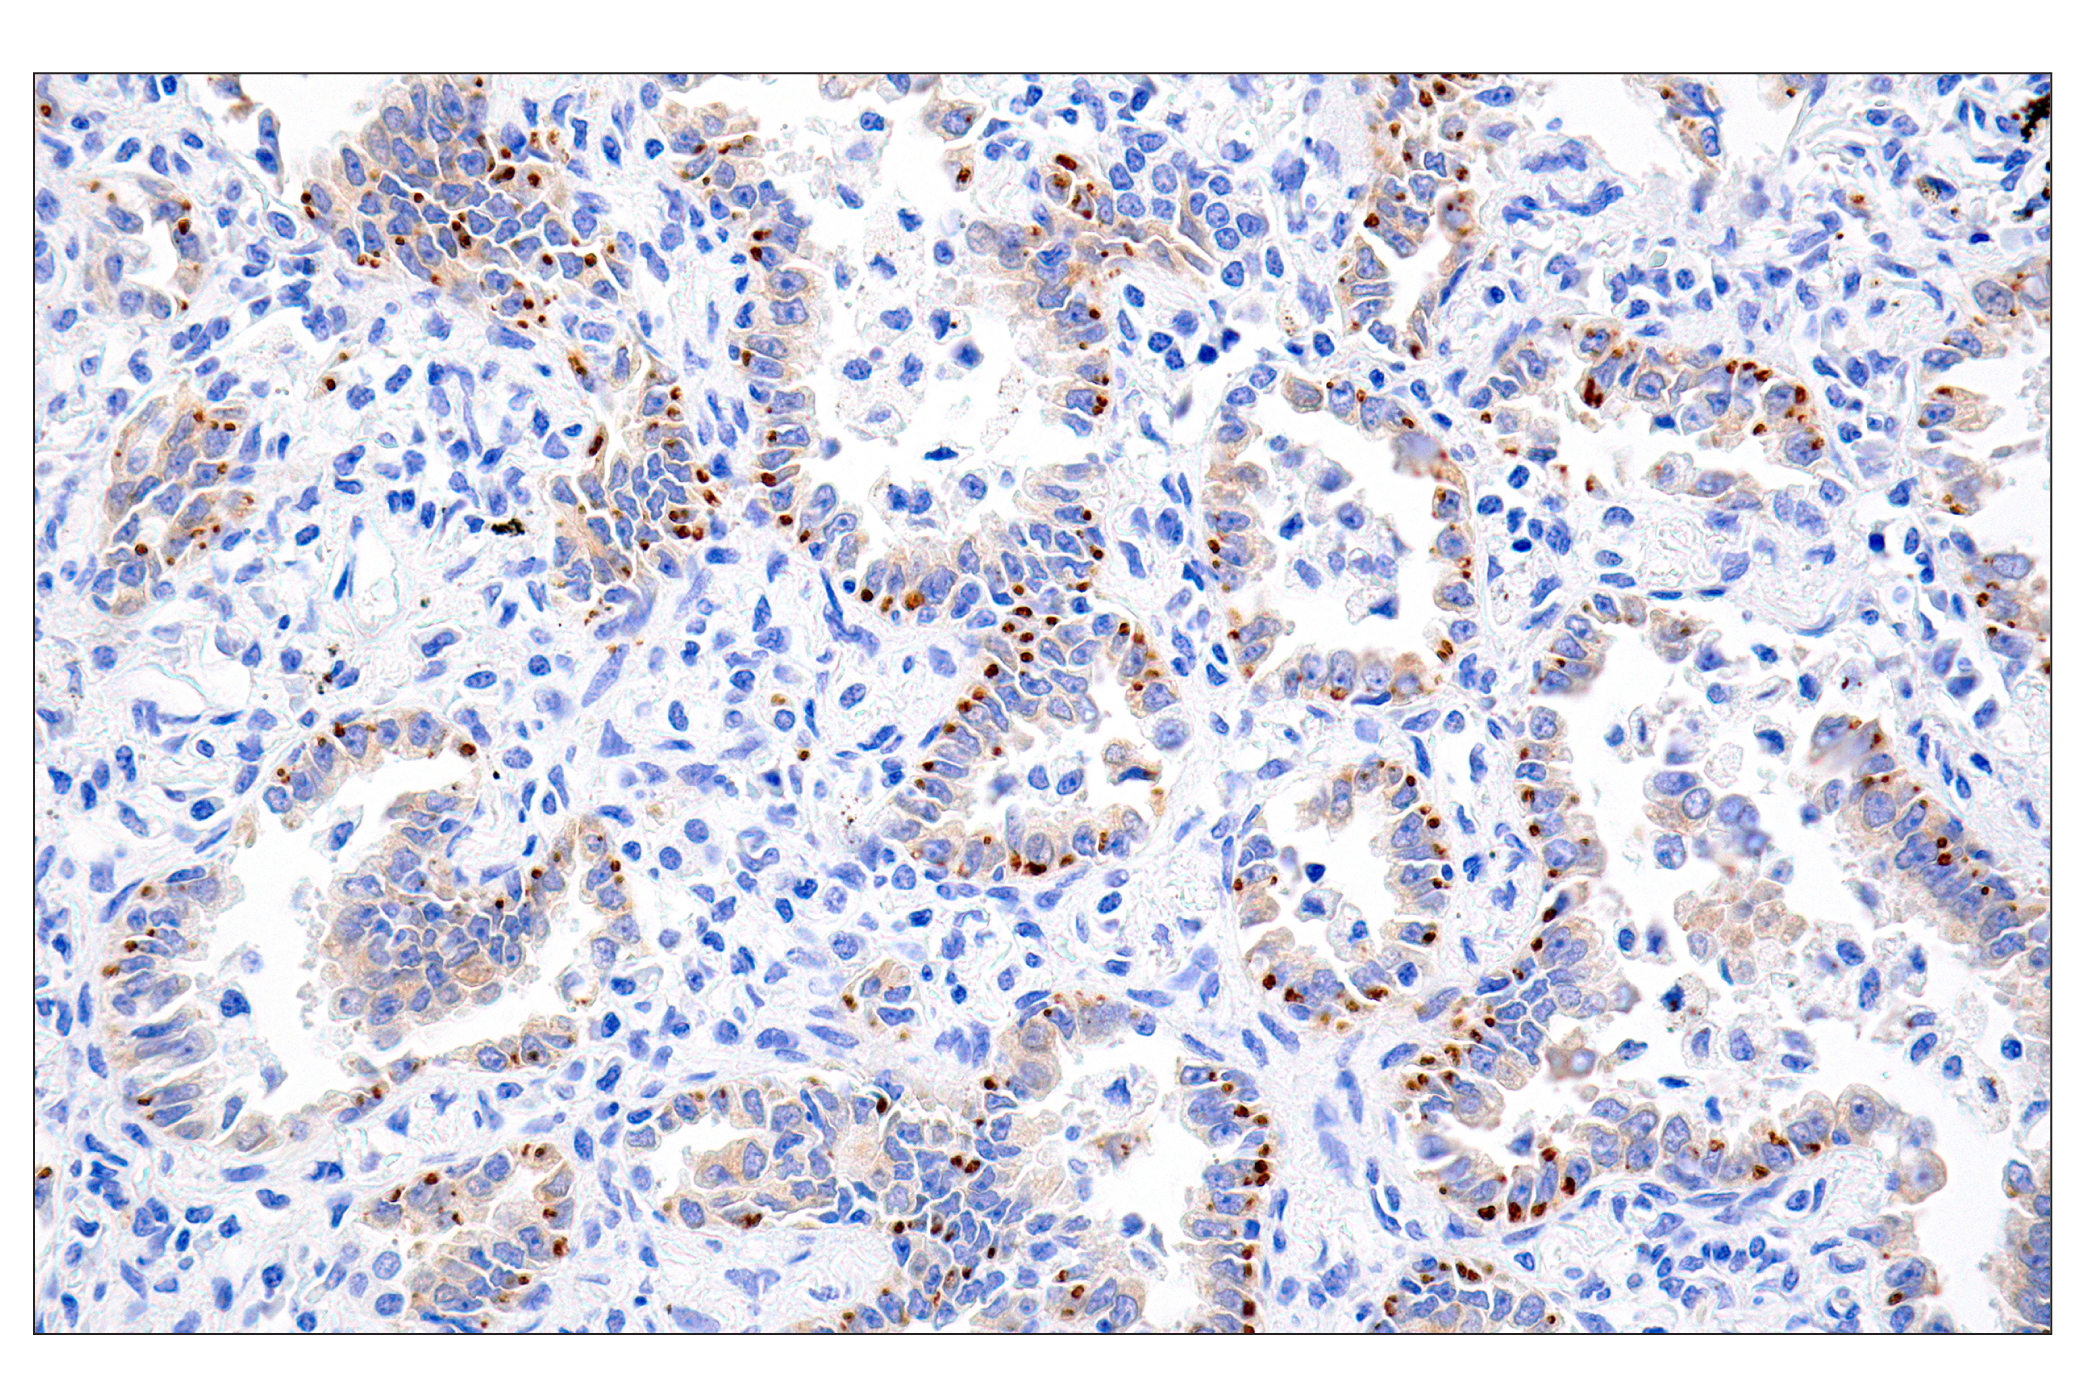 Immunohistochemistry Image 1: ROS1 (D4D6®) Rabbit mAb (Autostainer Formulated)